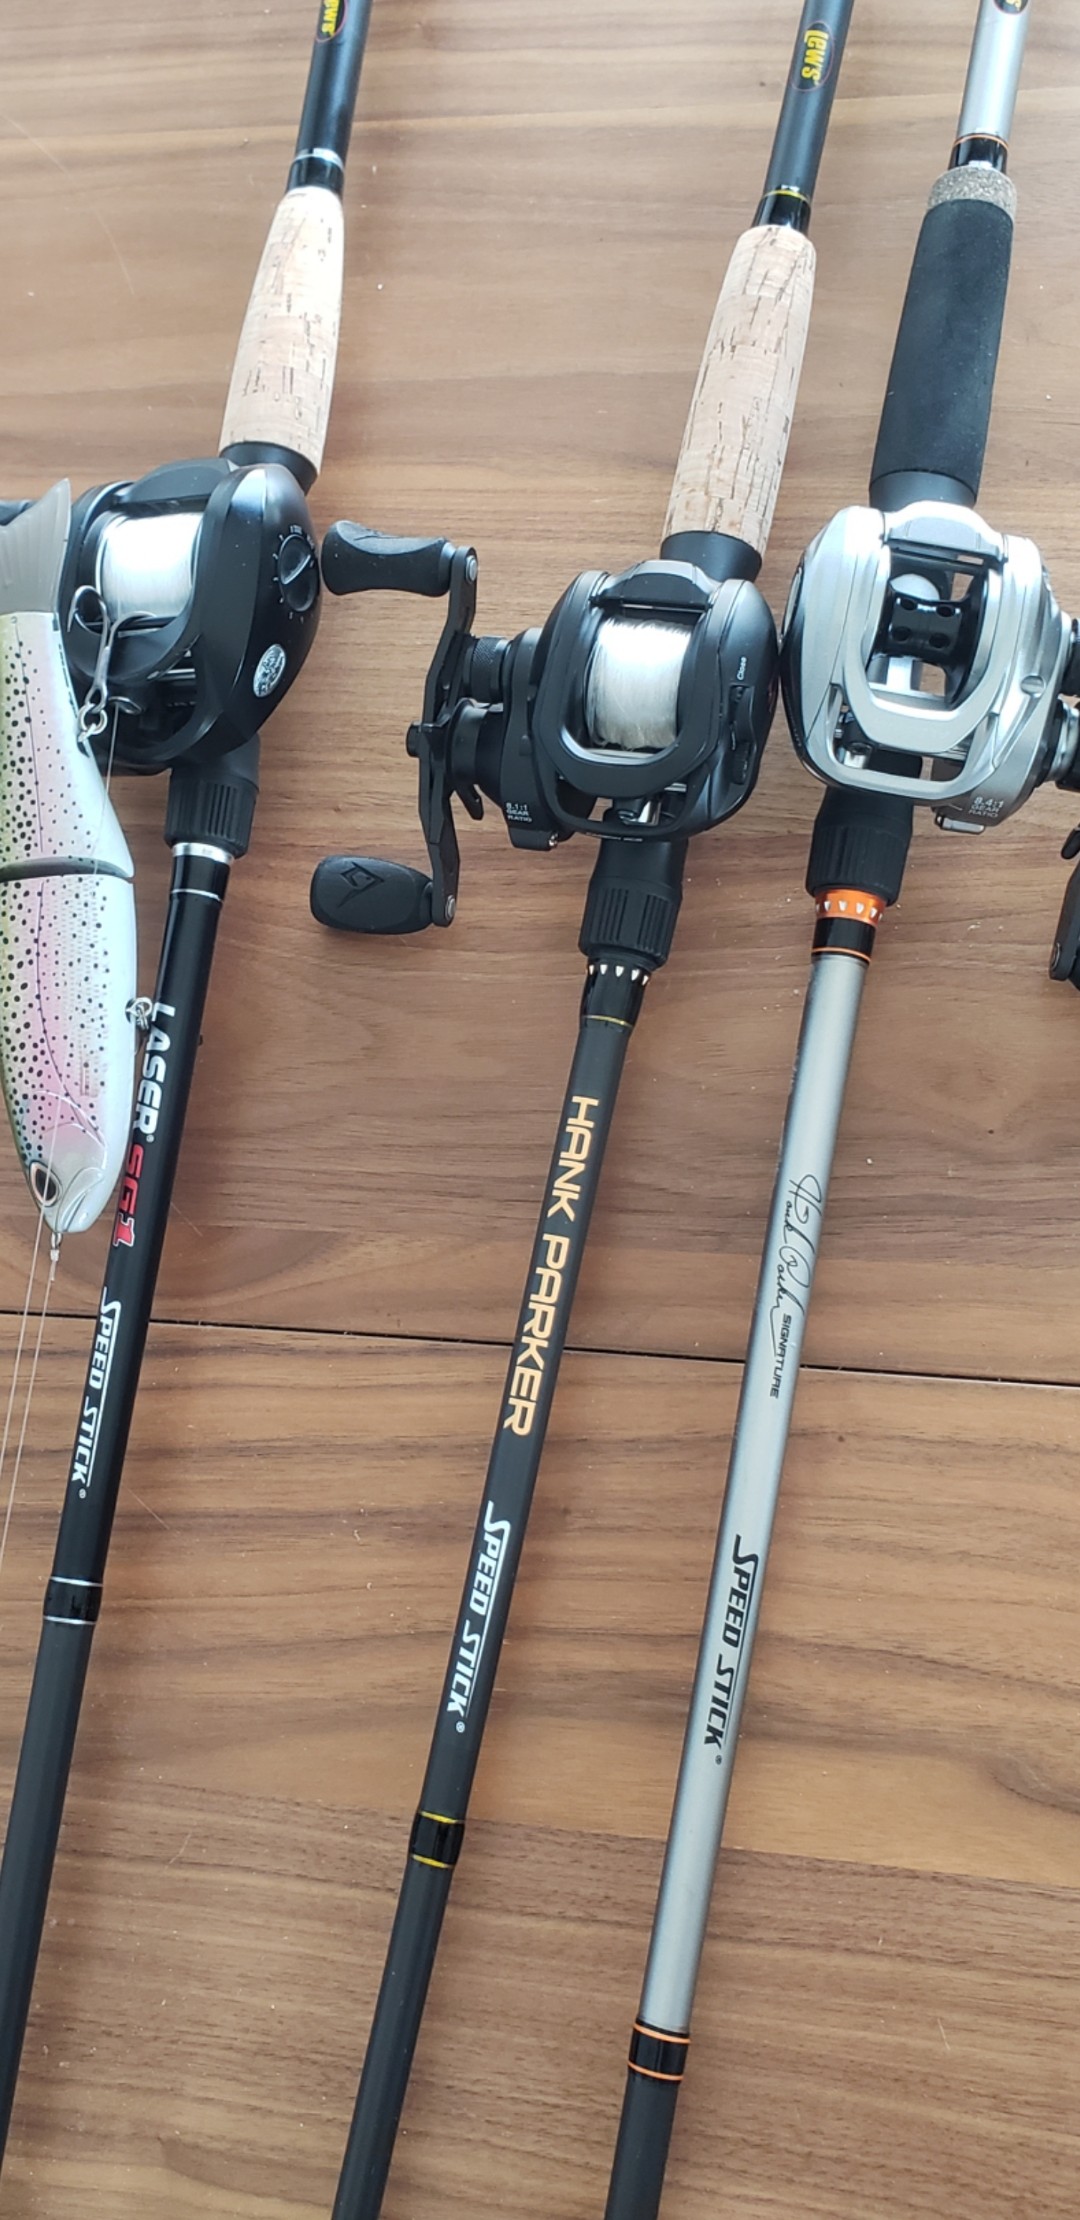 Lews xfinity and Berkley Power rod and Ugly Stick Carbon reviews, sort of.  - Fishing Rods, Reels, Line, and Knots - Bass Fishing Forums